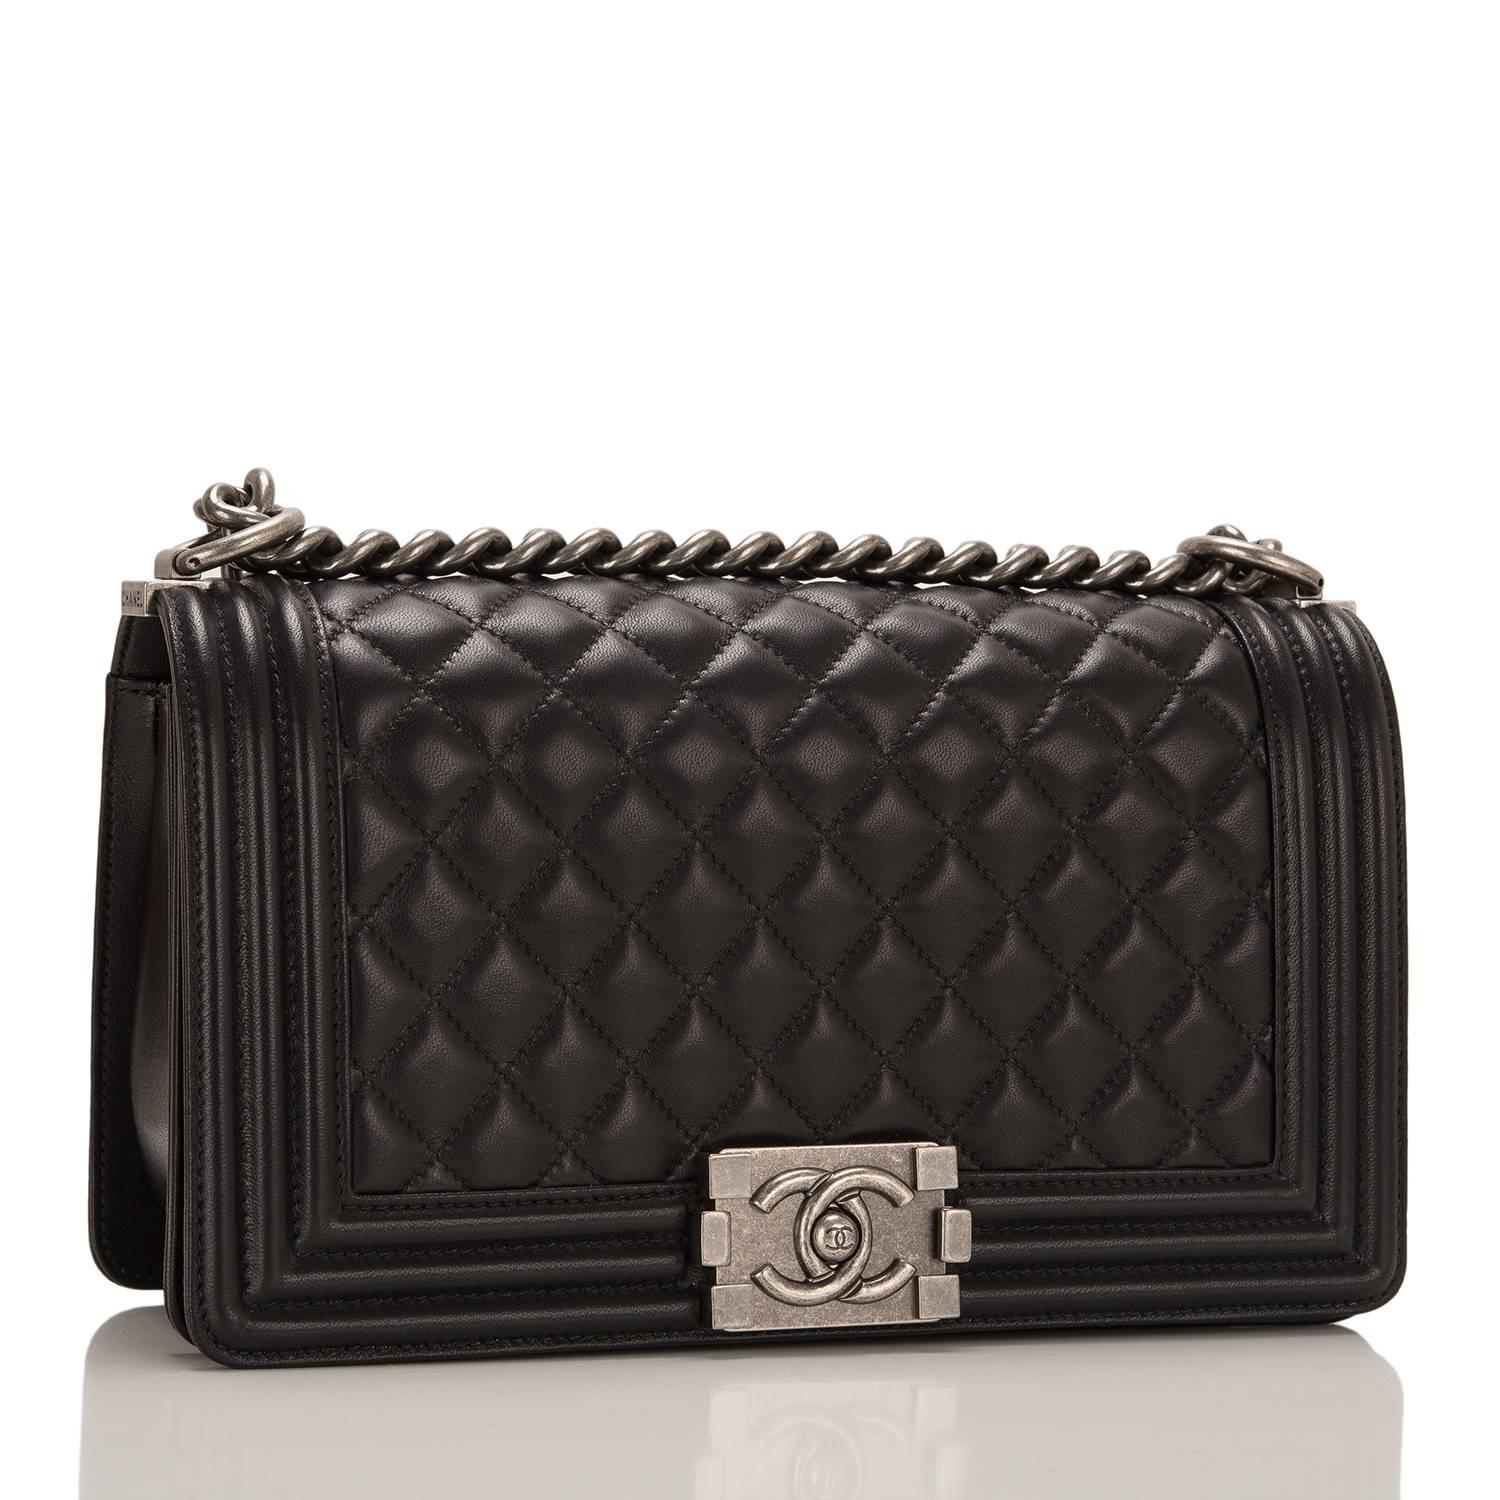 This Chanel Medium Boy bag is made of black lambskin leather and accented with aged ruthenium hardware.

The bag features a full front flap with signature Le Boy CC logo push lock closure and an aged ruthenium chain link and black leather padded